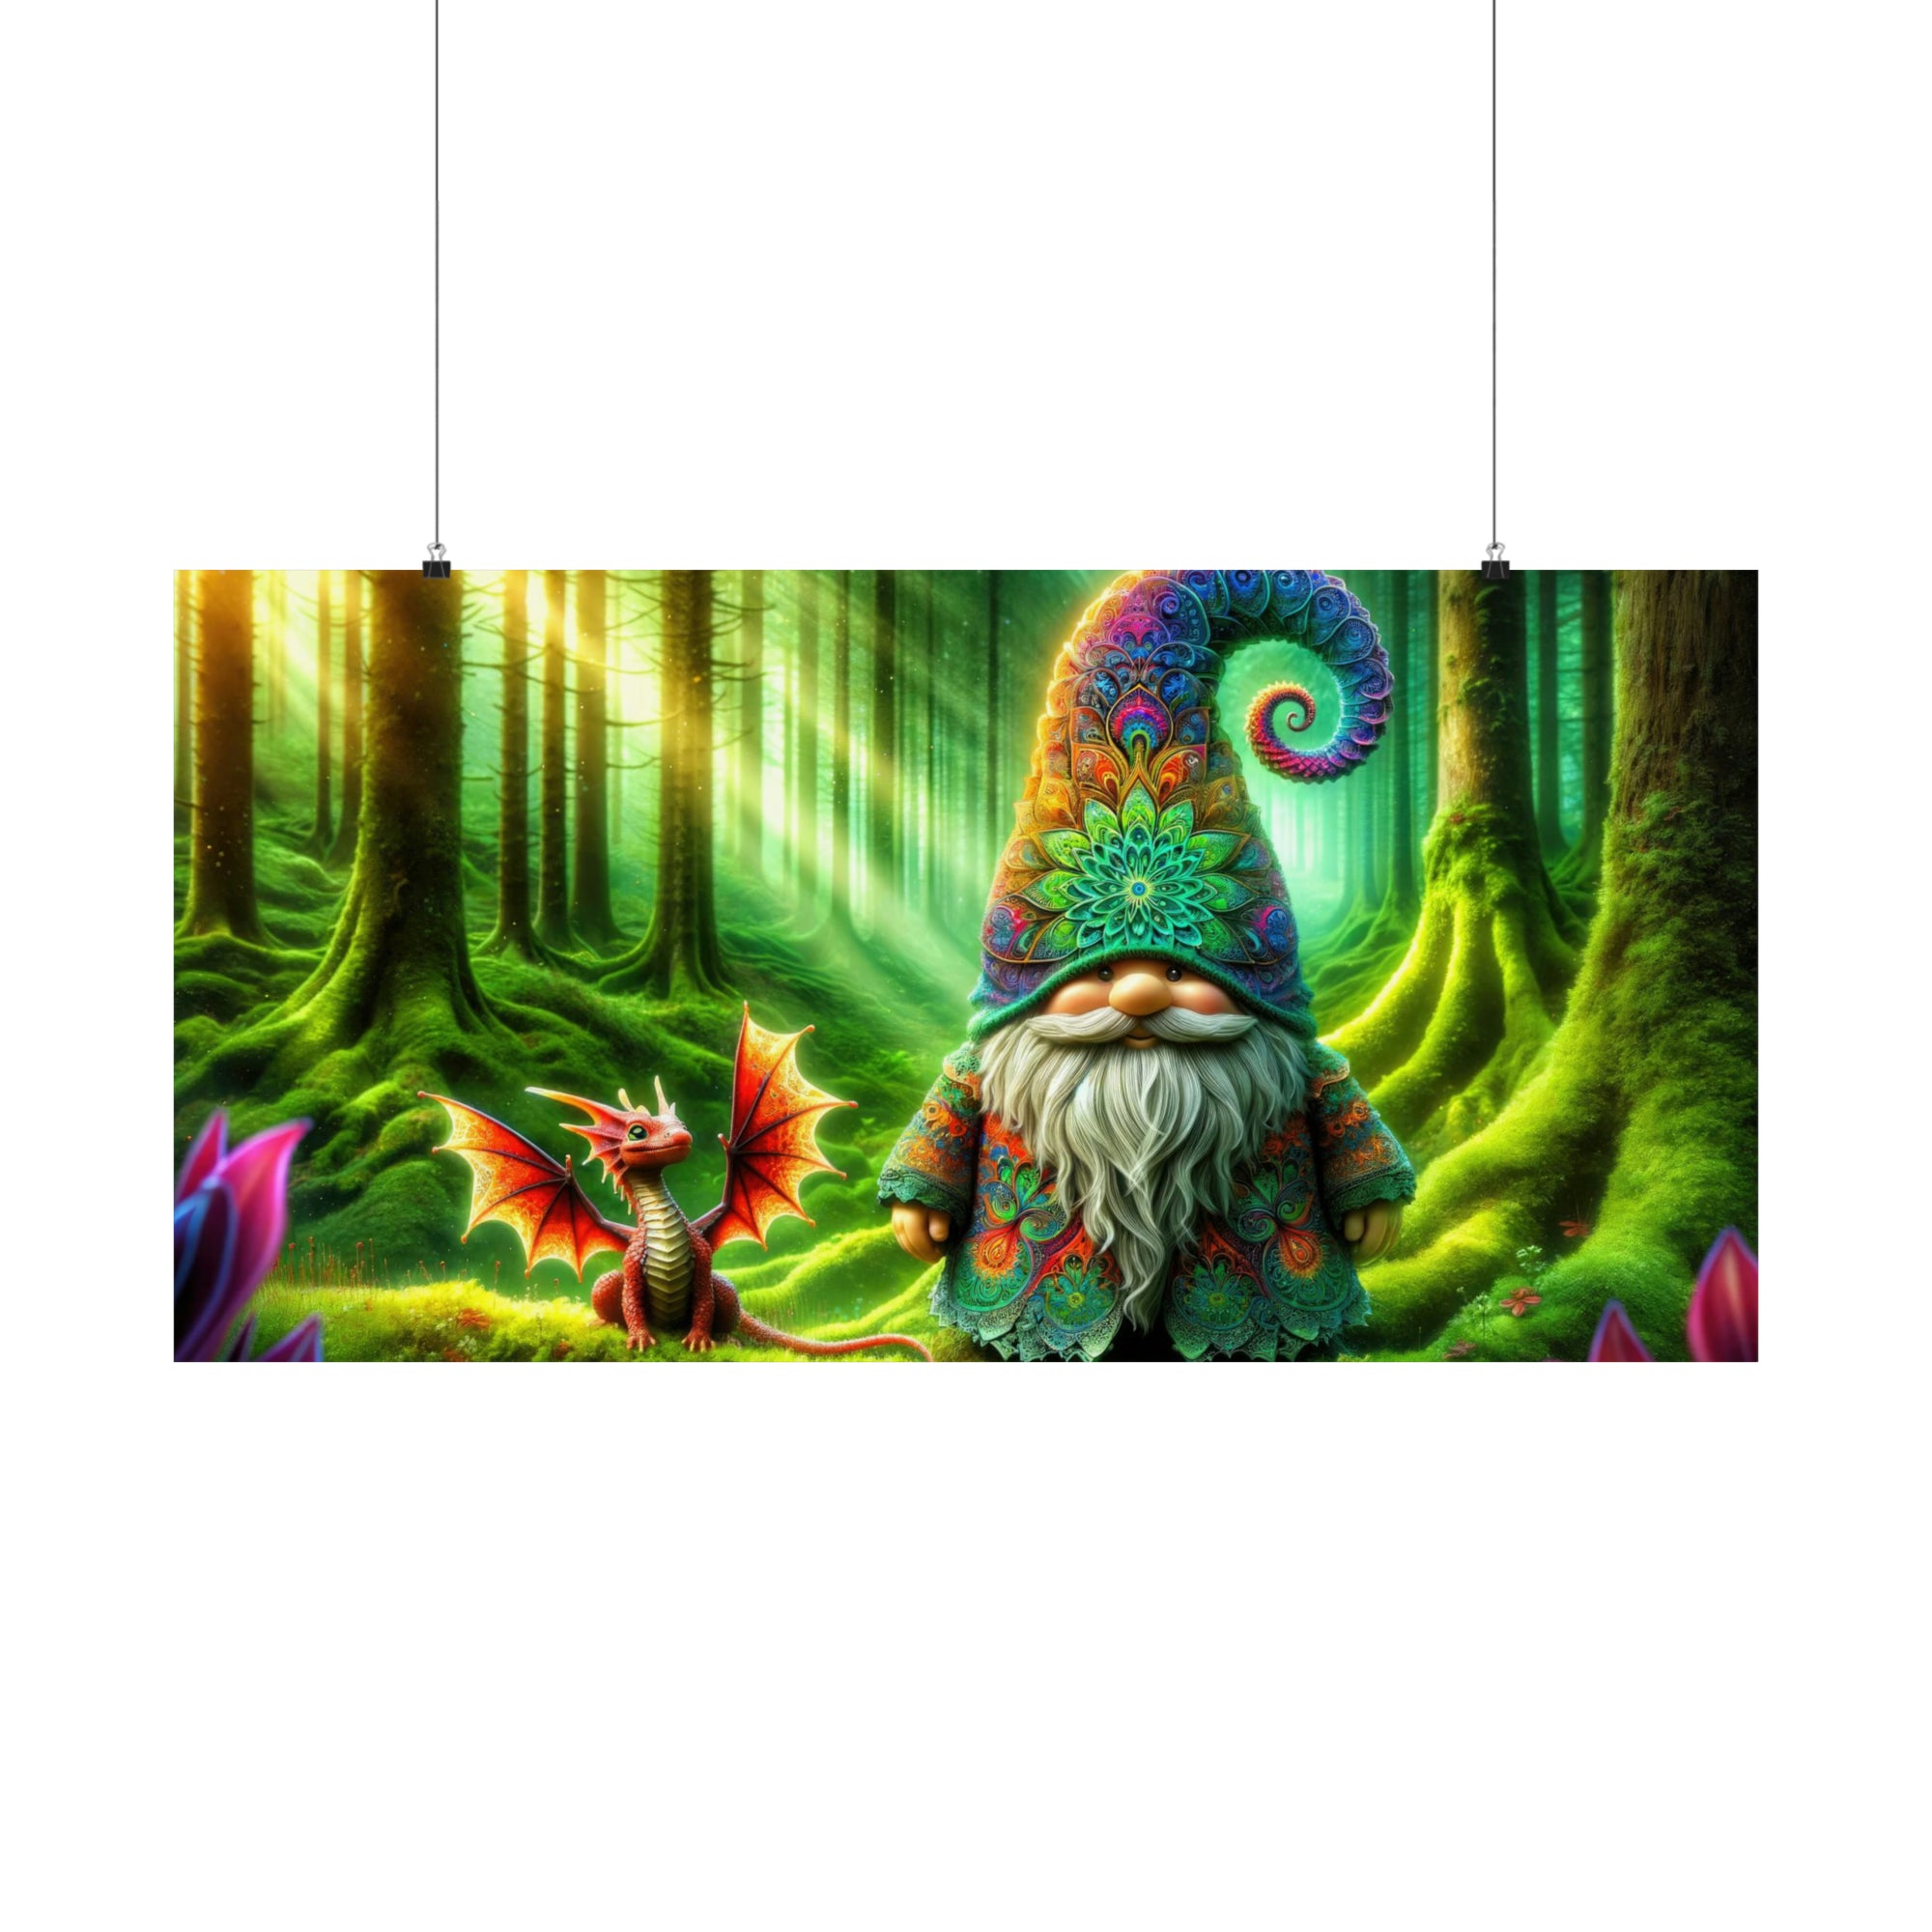 The Gnome's Enchanted Morn Poster